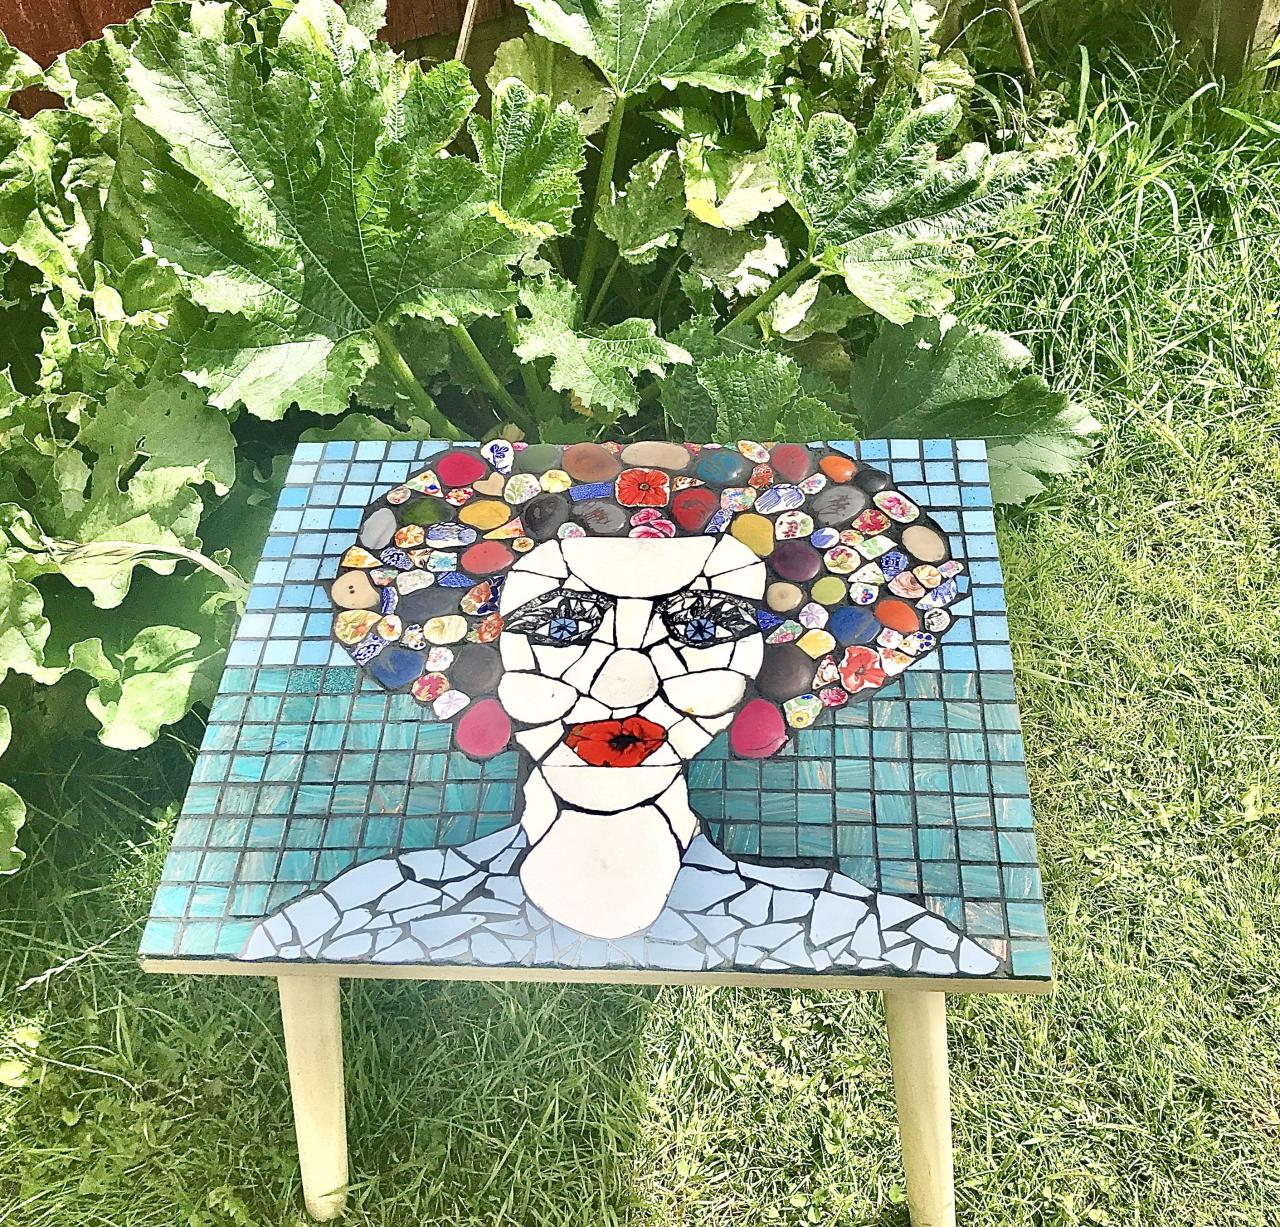 Meet ‘Poppy Lips’ handcrafted unique piqueassiette mosaic coffee table